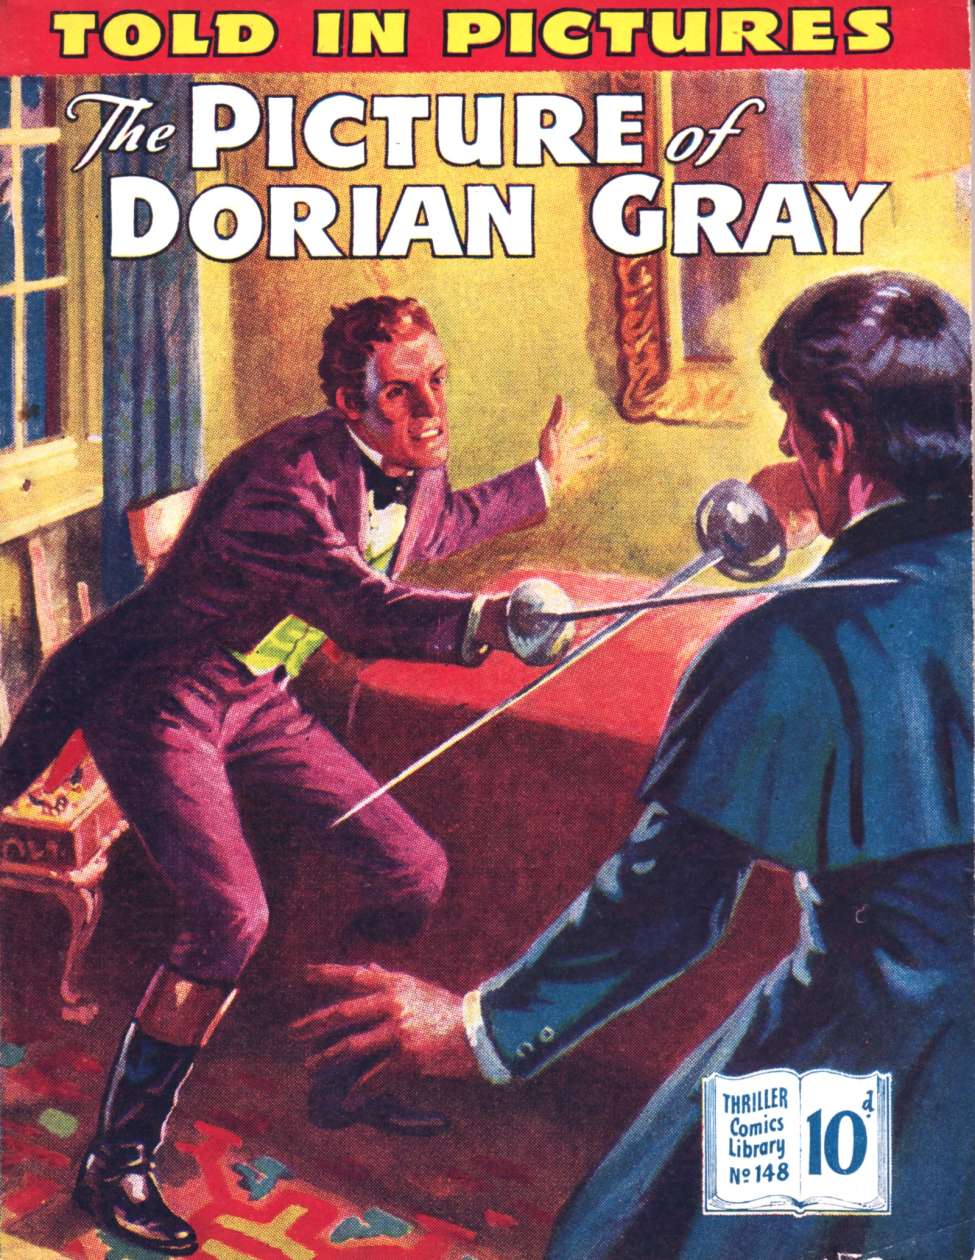 Book Cover For Thriller Comics Library 148 - The Picture of Dorian Gray